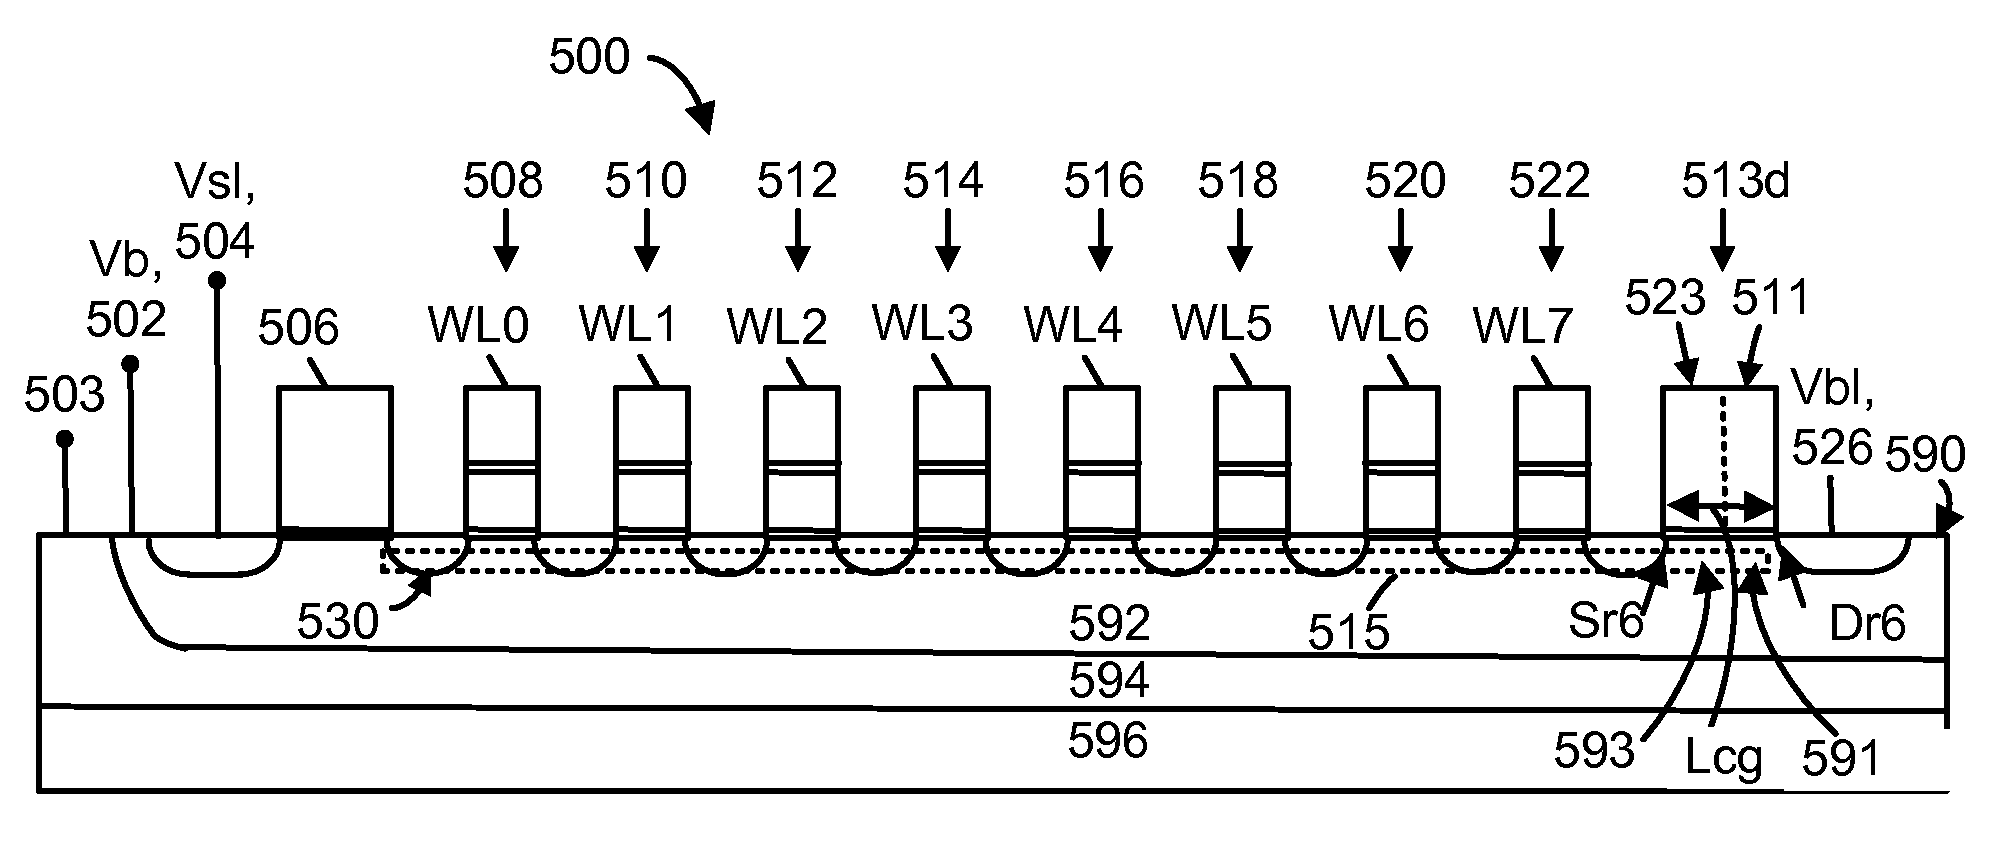 Select gate materials having different work functions in non-volatile memory